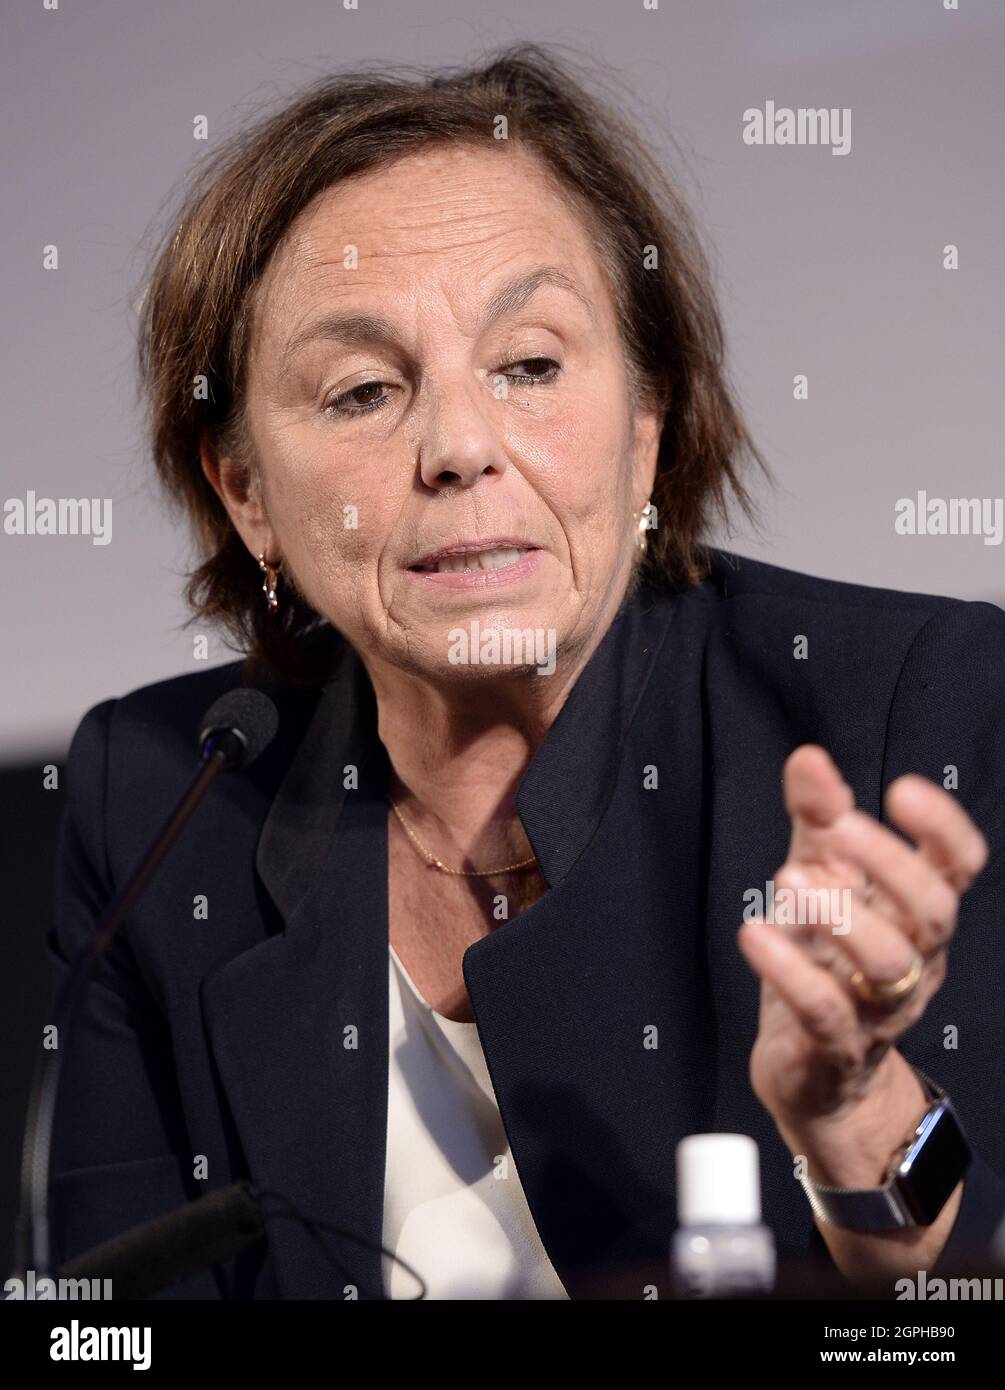 Rome, Italy. 29th Sep, 2021. Rome 29/09/2021 The Minister of the Interior Luciana Lamorgese at the Festival of the Cities organized by ALI (Italian Local Autonomies) Credit: Independent Photo Agency/Alamy Live News Stock Photo